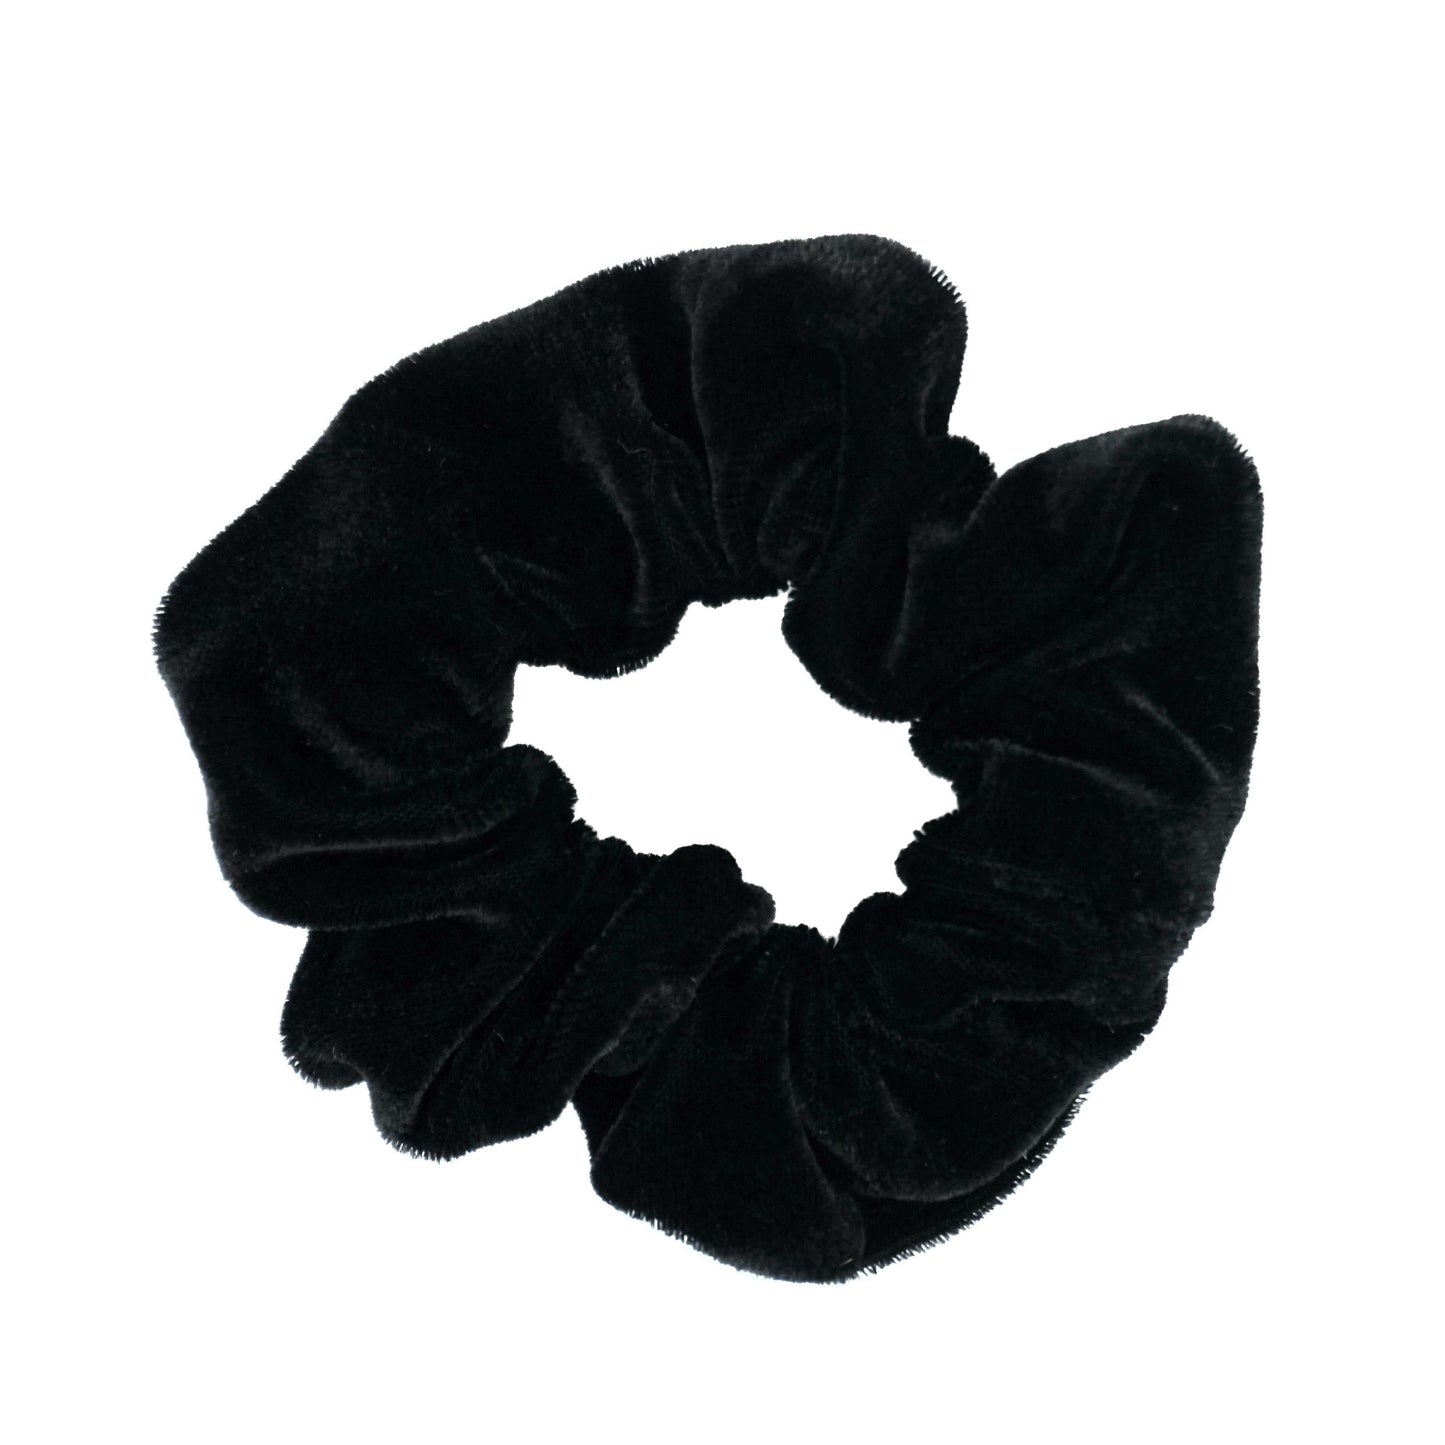 Amelia Beauty Products, Black, White and Brown Velvet Velvet Scrunchies, 3.5in Diameter, Gentle on Hair, Strong Hold, No Snag, No Dents or Creases. 8 Pack - 12 Retail Packs